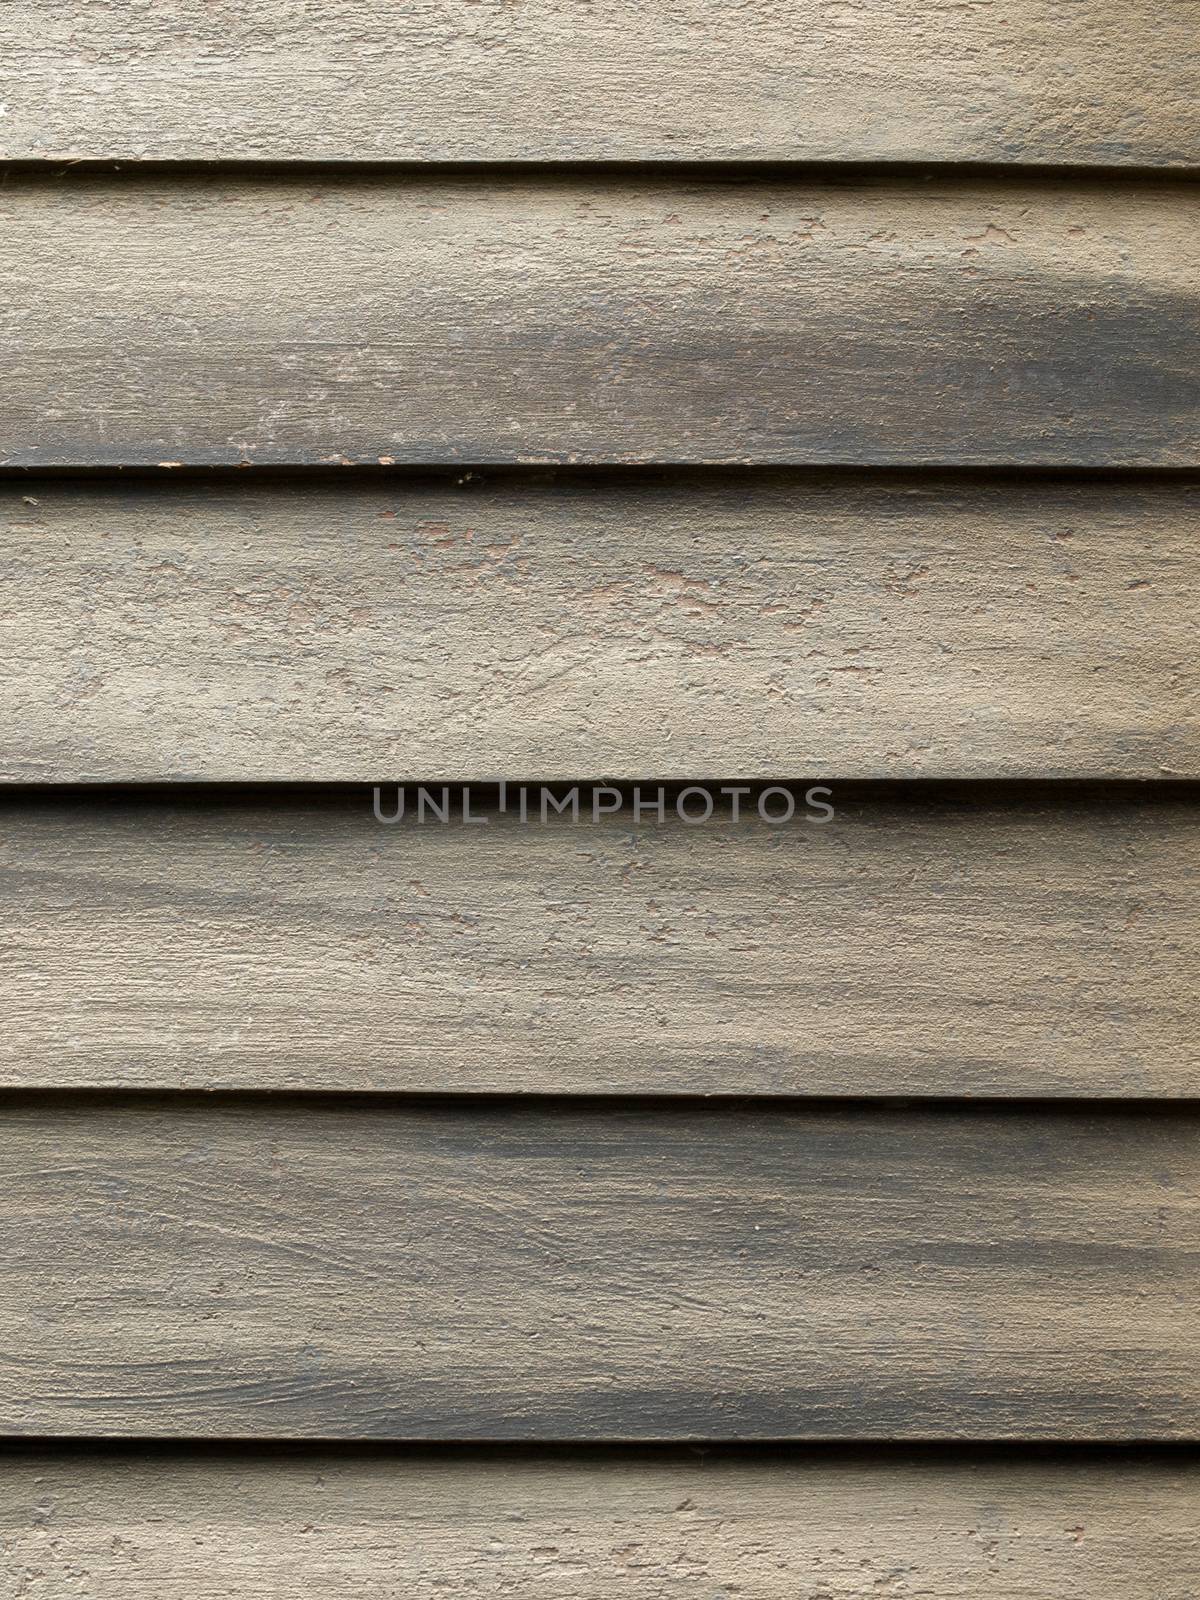 ROUGH TEXTURE OF WOOD by PrettyTG